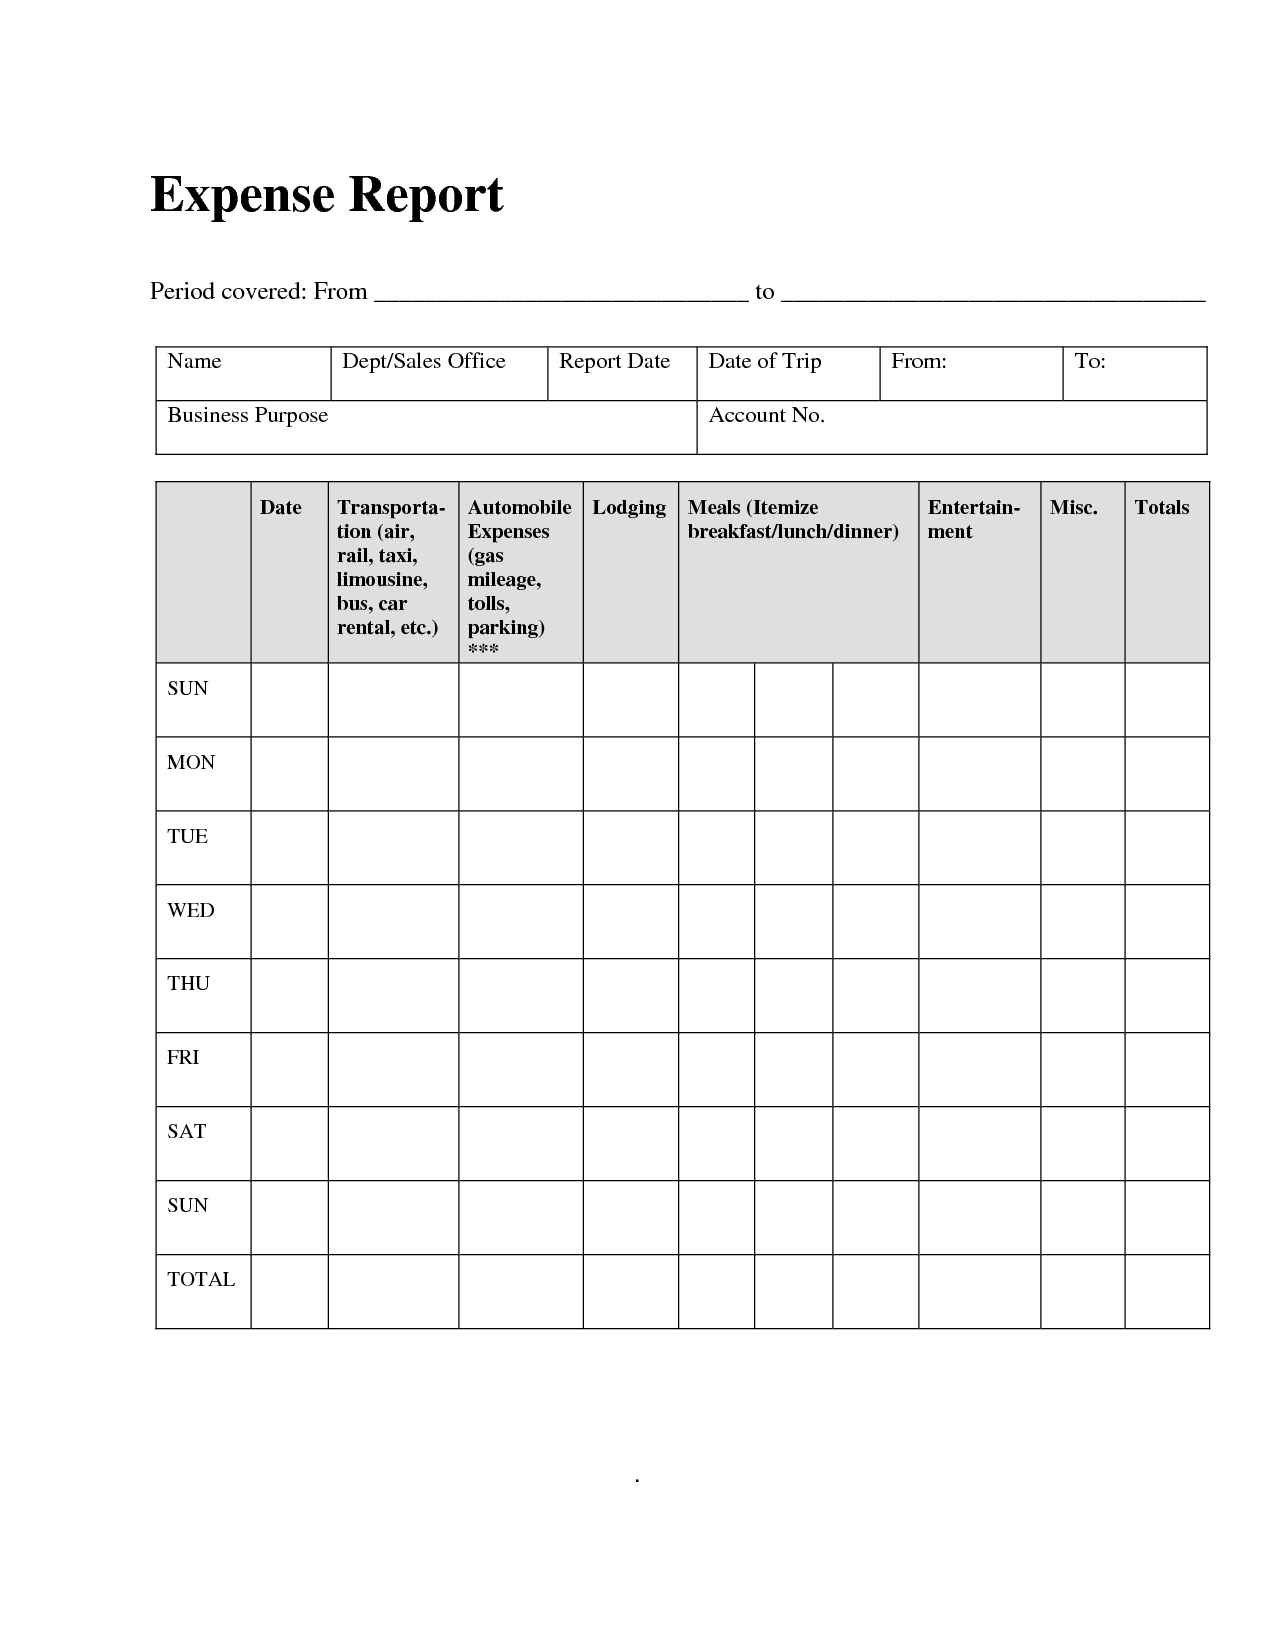 Expense Report Form Template 1537